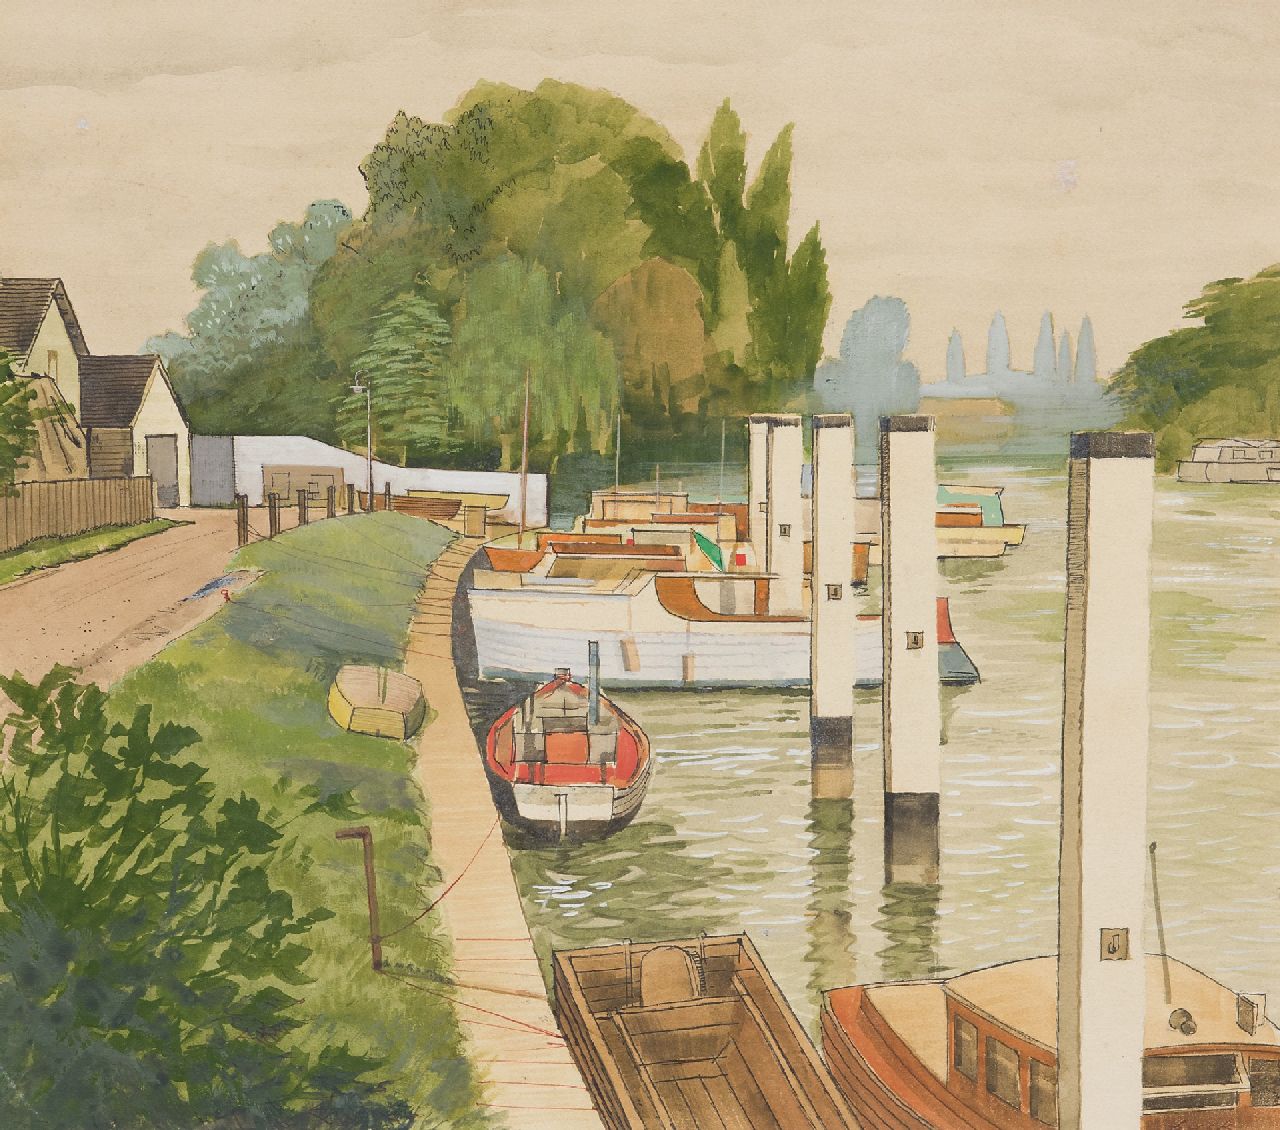 Back R.T.  | Robert Trenaman Back | Watercolours and drawings offered for sale | The 'Shepperton Lock' in the river Thames, watercolour on board 35.4 x 39.9 cm, signed l.r.